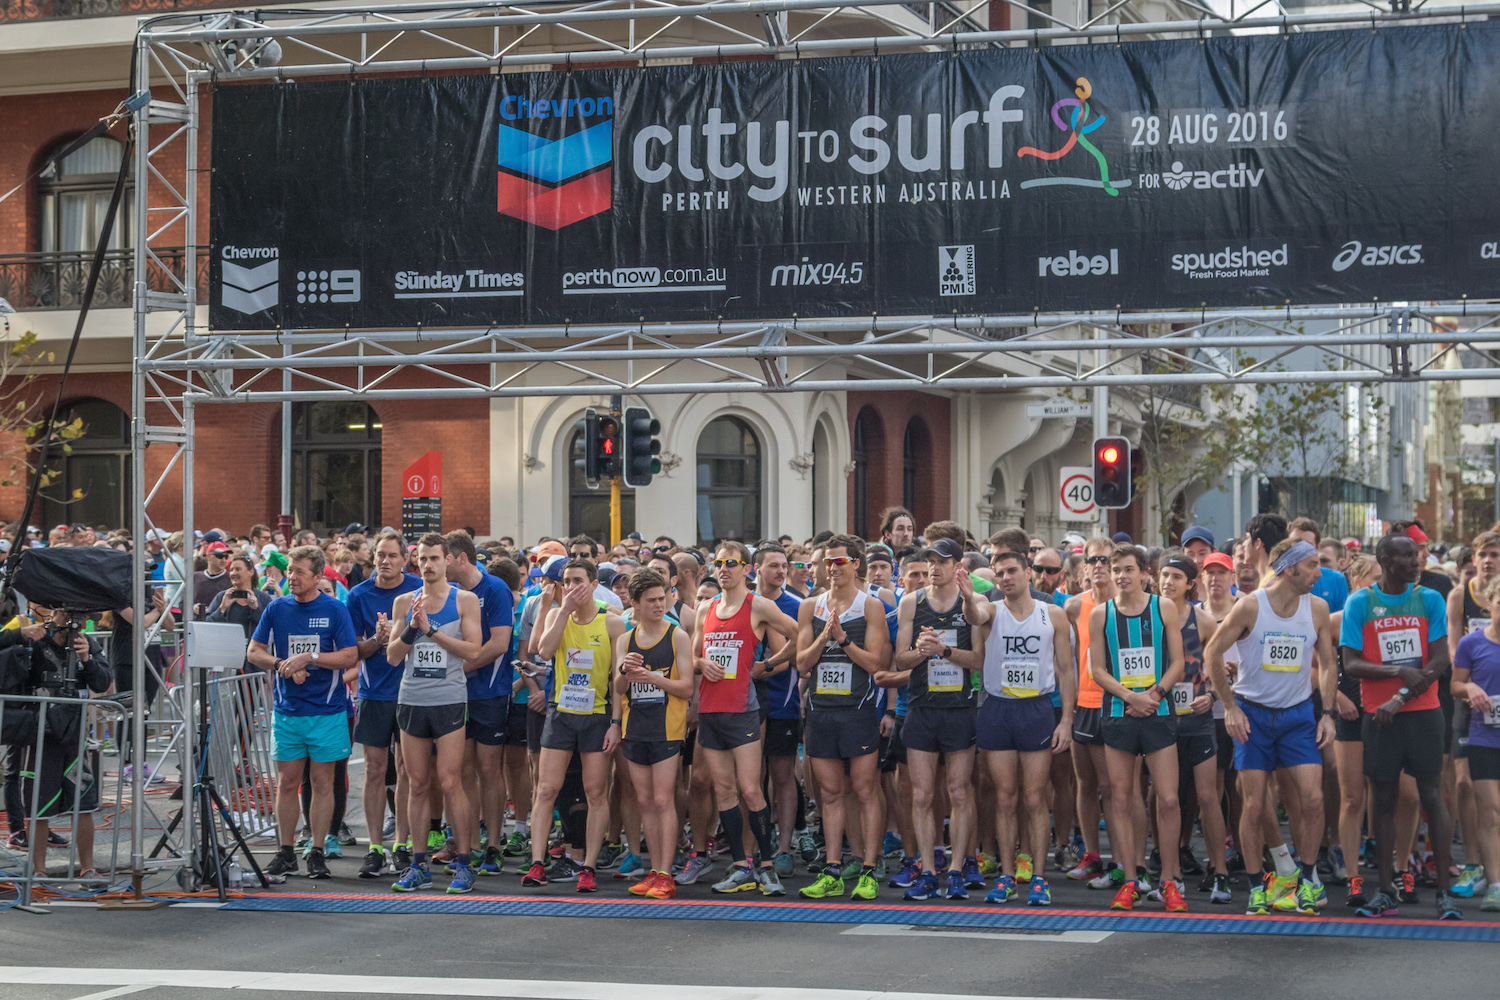 Chevron City to Surf for Activ 2016